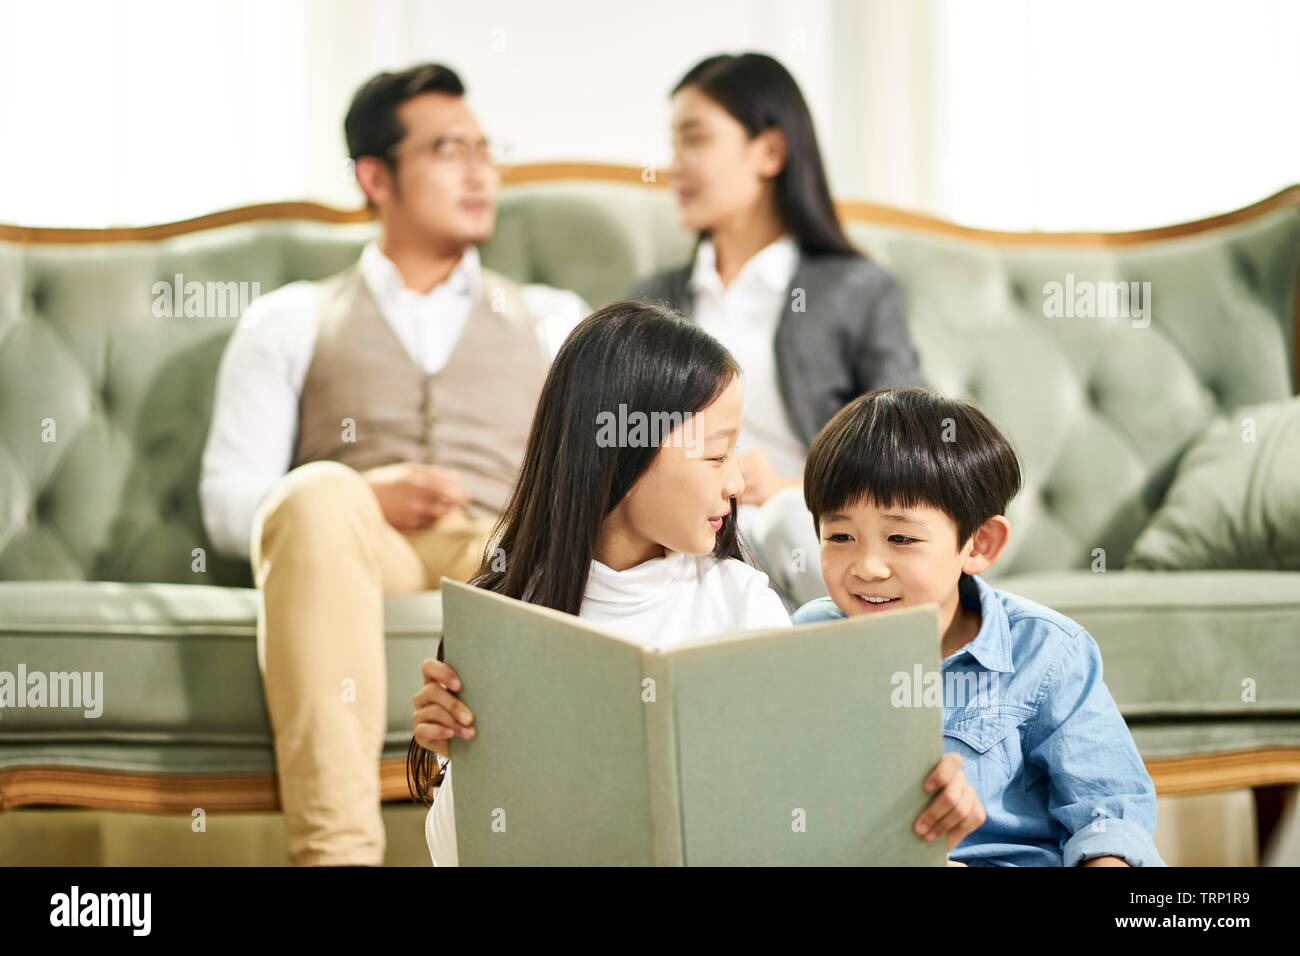 asian brother and sister sitting on carpet in family living room reading book together while parents talking in background. Stock Photo